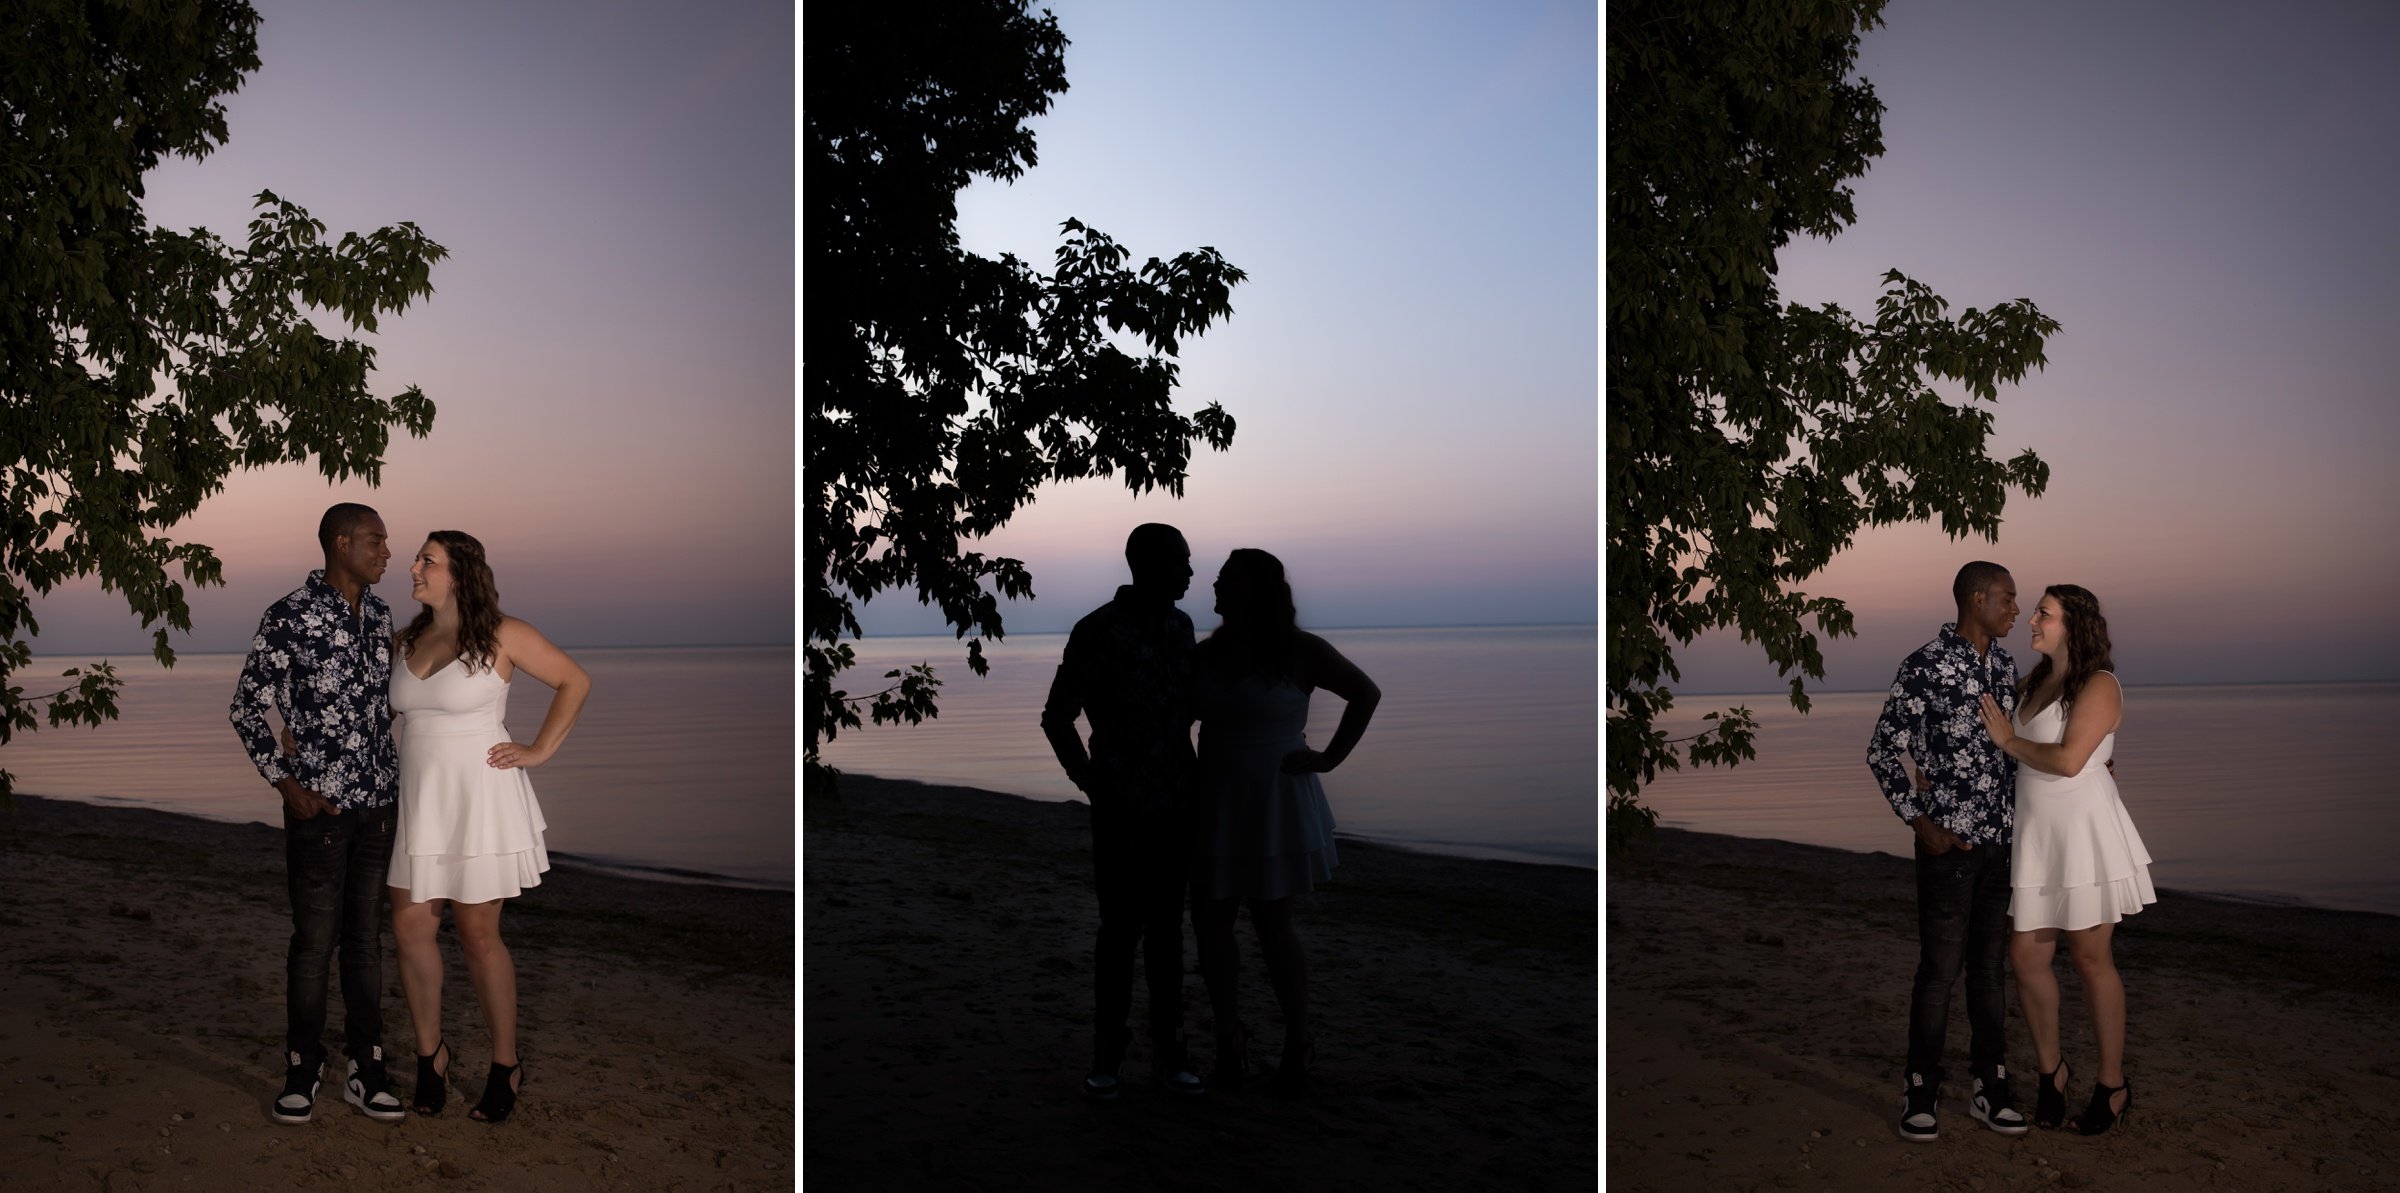 Jessica and Paul - A Sunset Bay Shore Park Engagement Session57.jpg